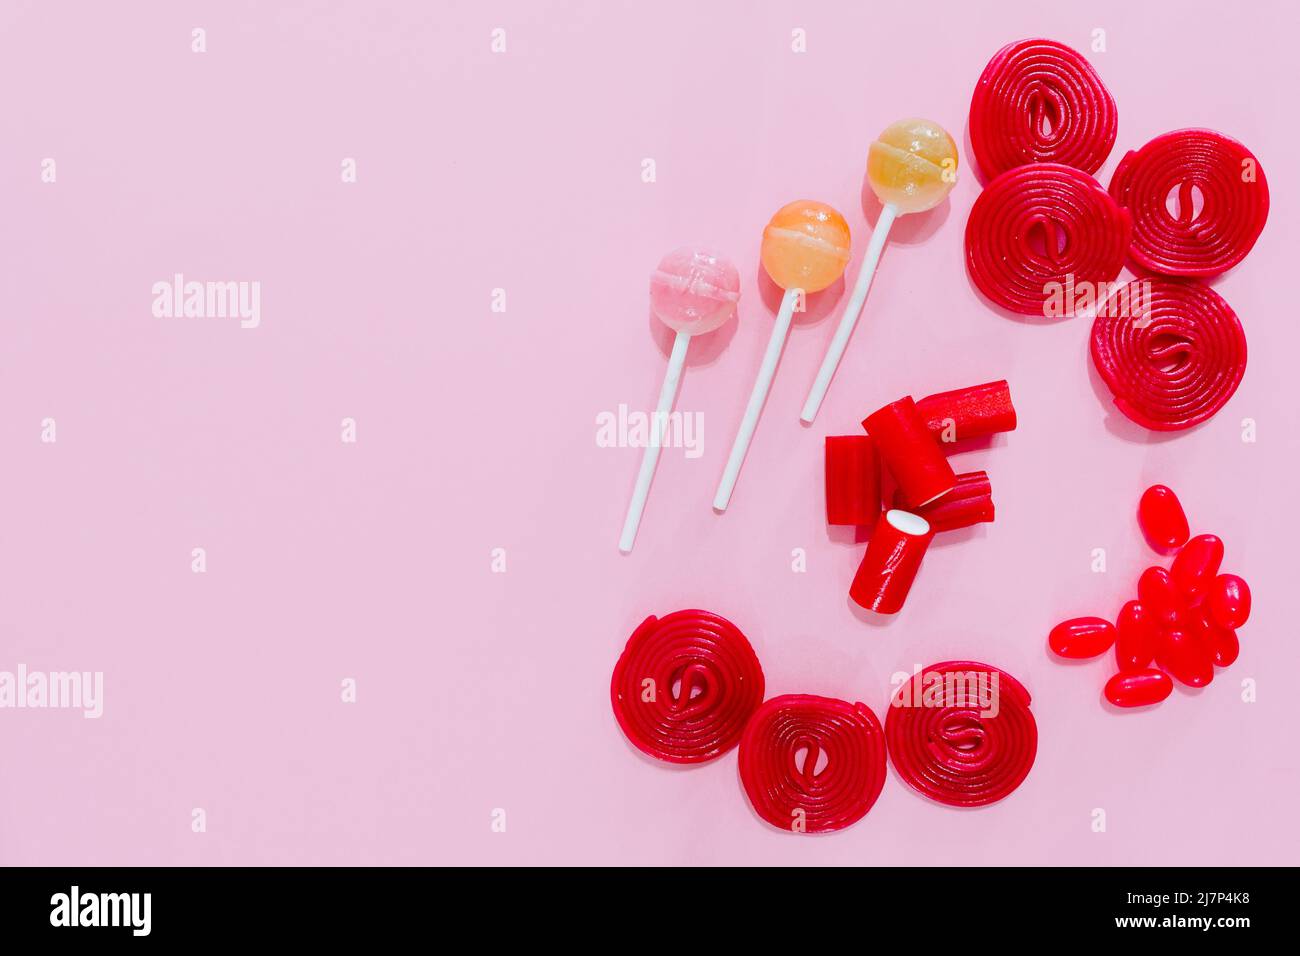 candies and red lollipops on a plain pink background. wallpaper to use text. graphic resource. Stock Photo